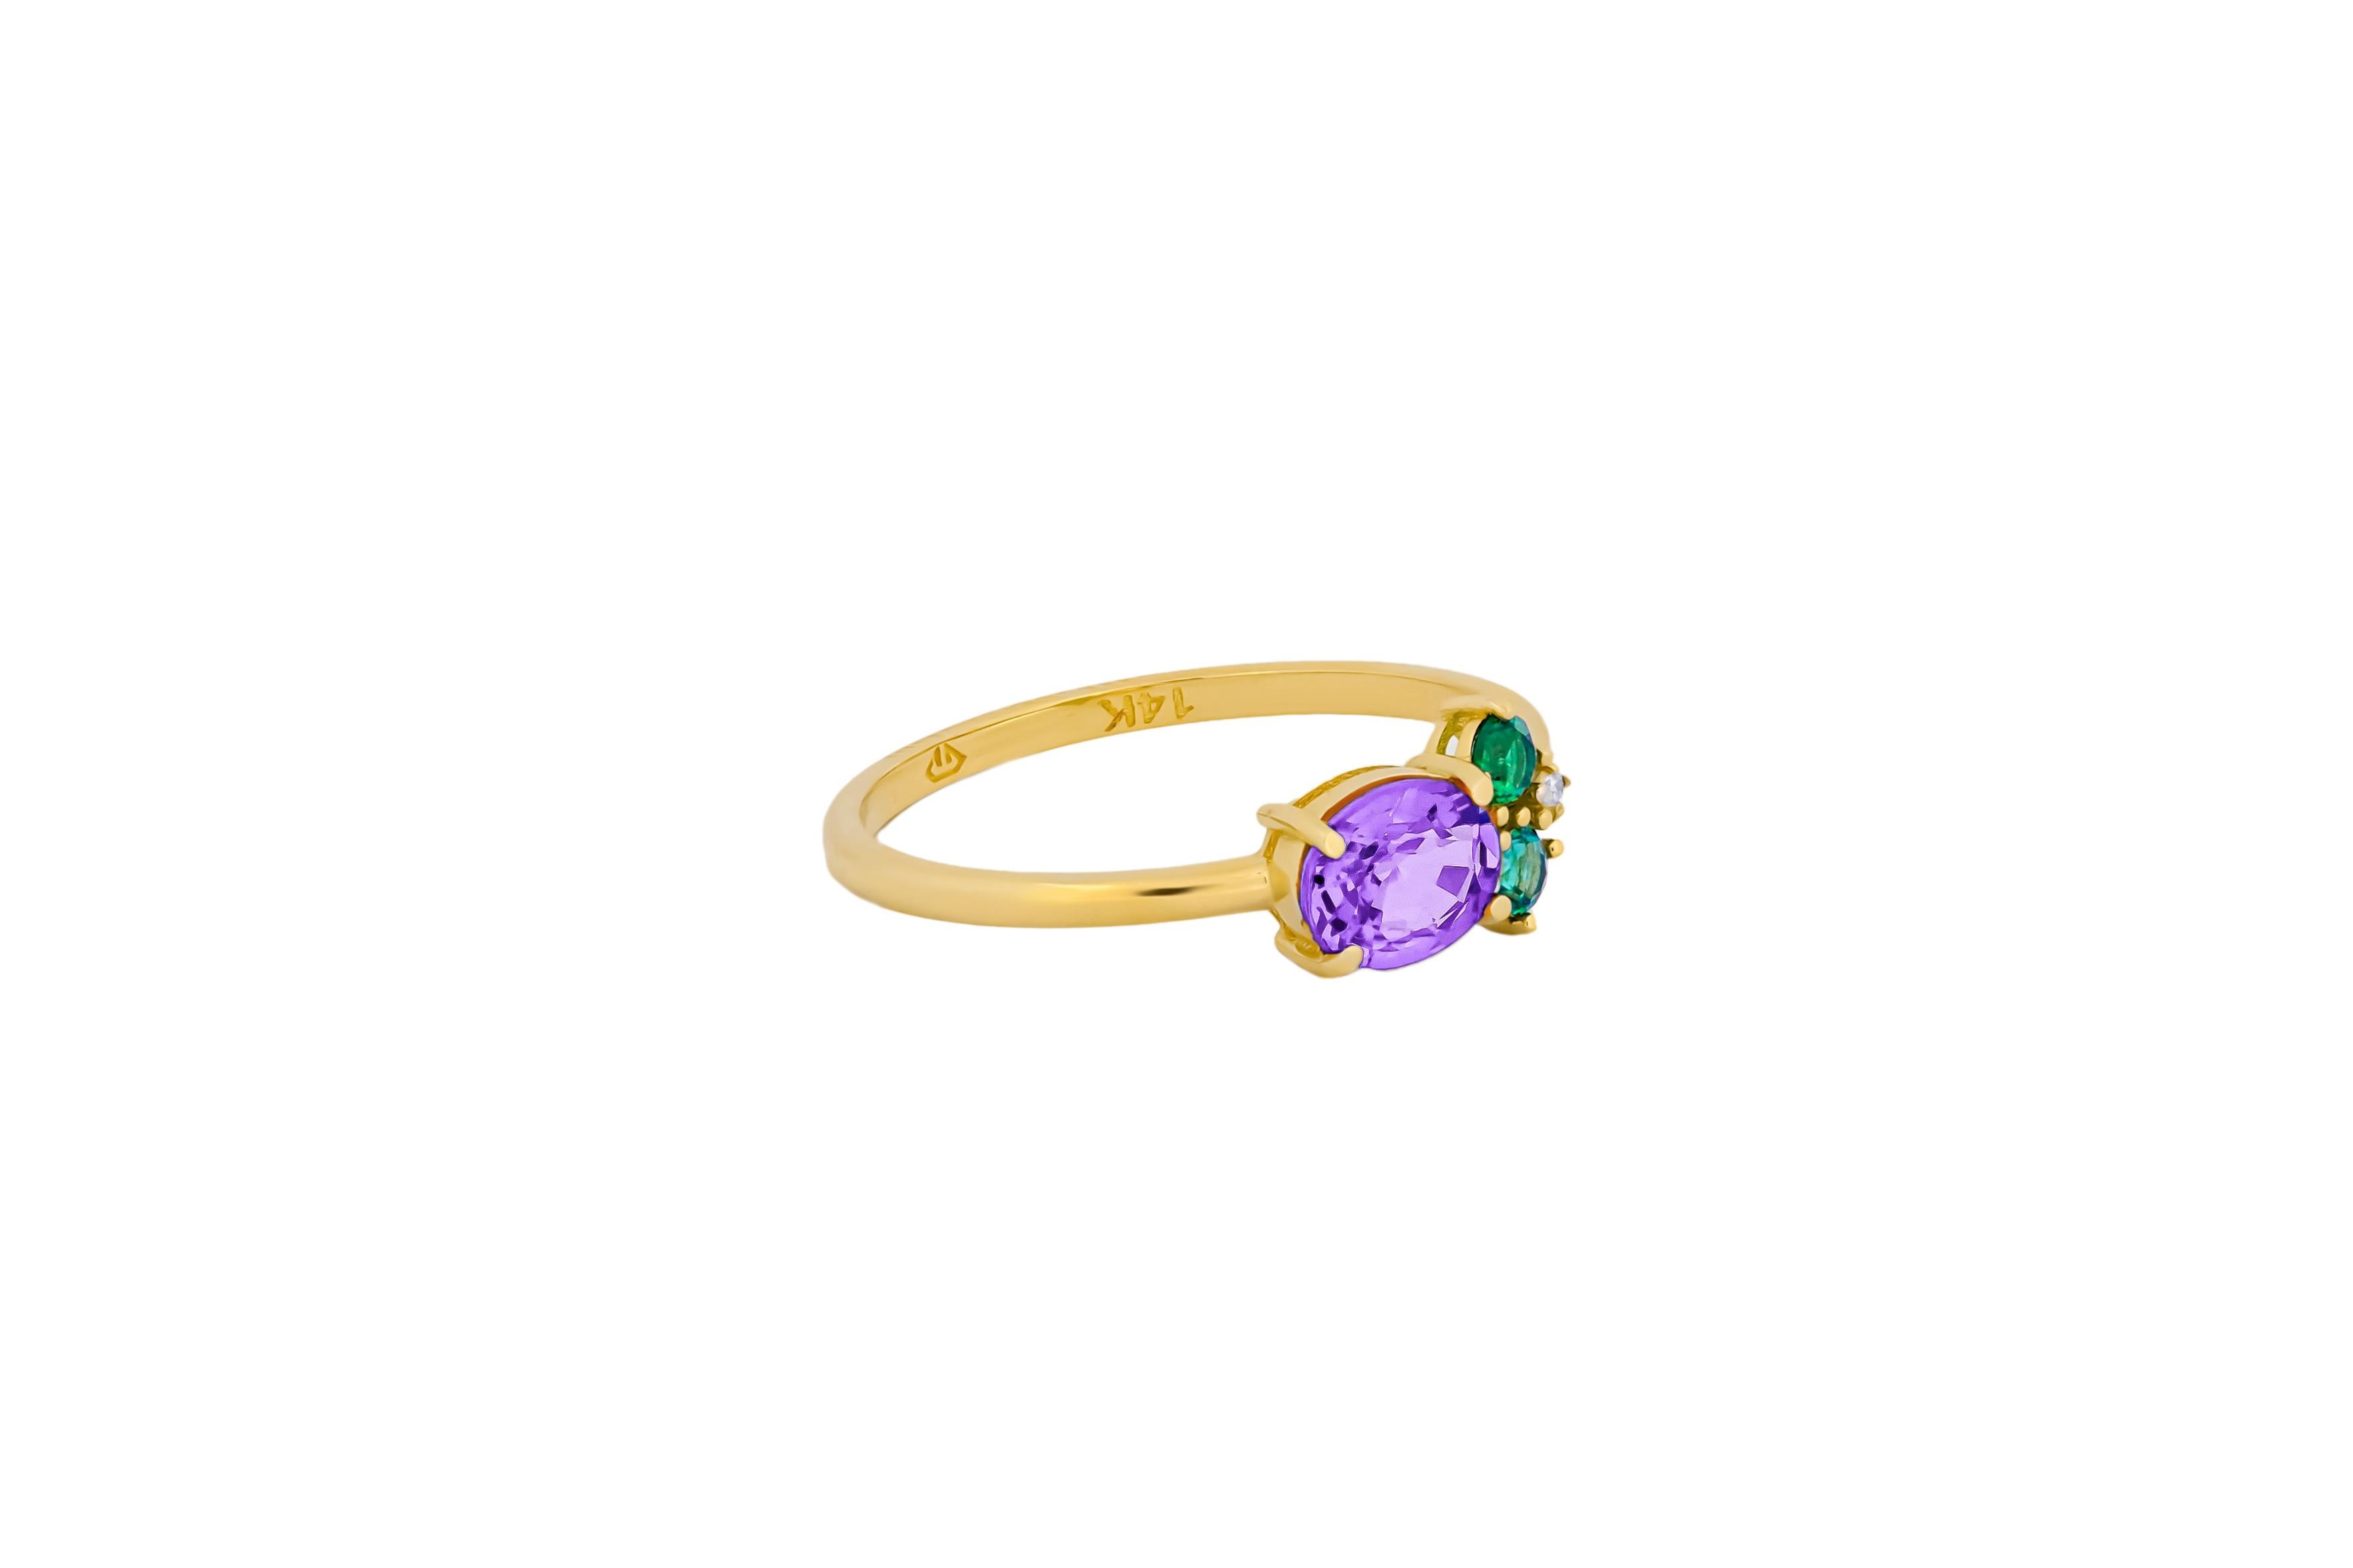 For Sale:  Oval amethyst, tsavorite and diamonds 14k gold ring. 5